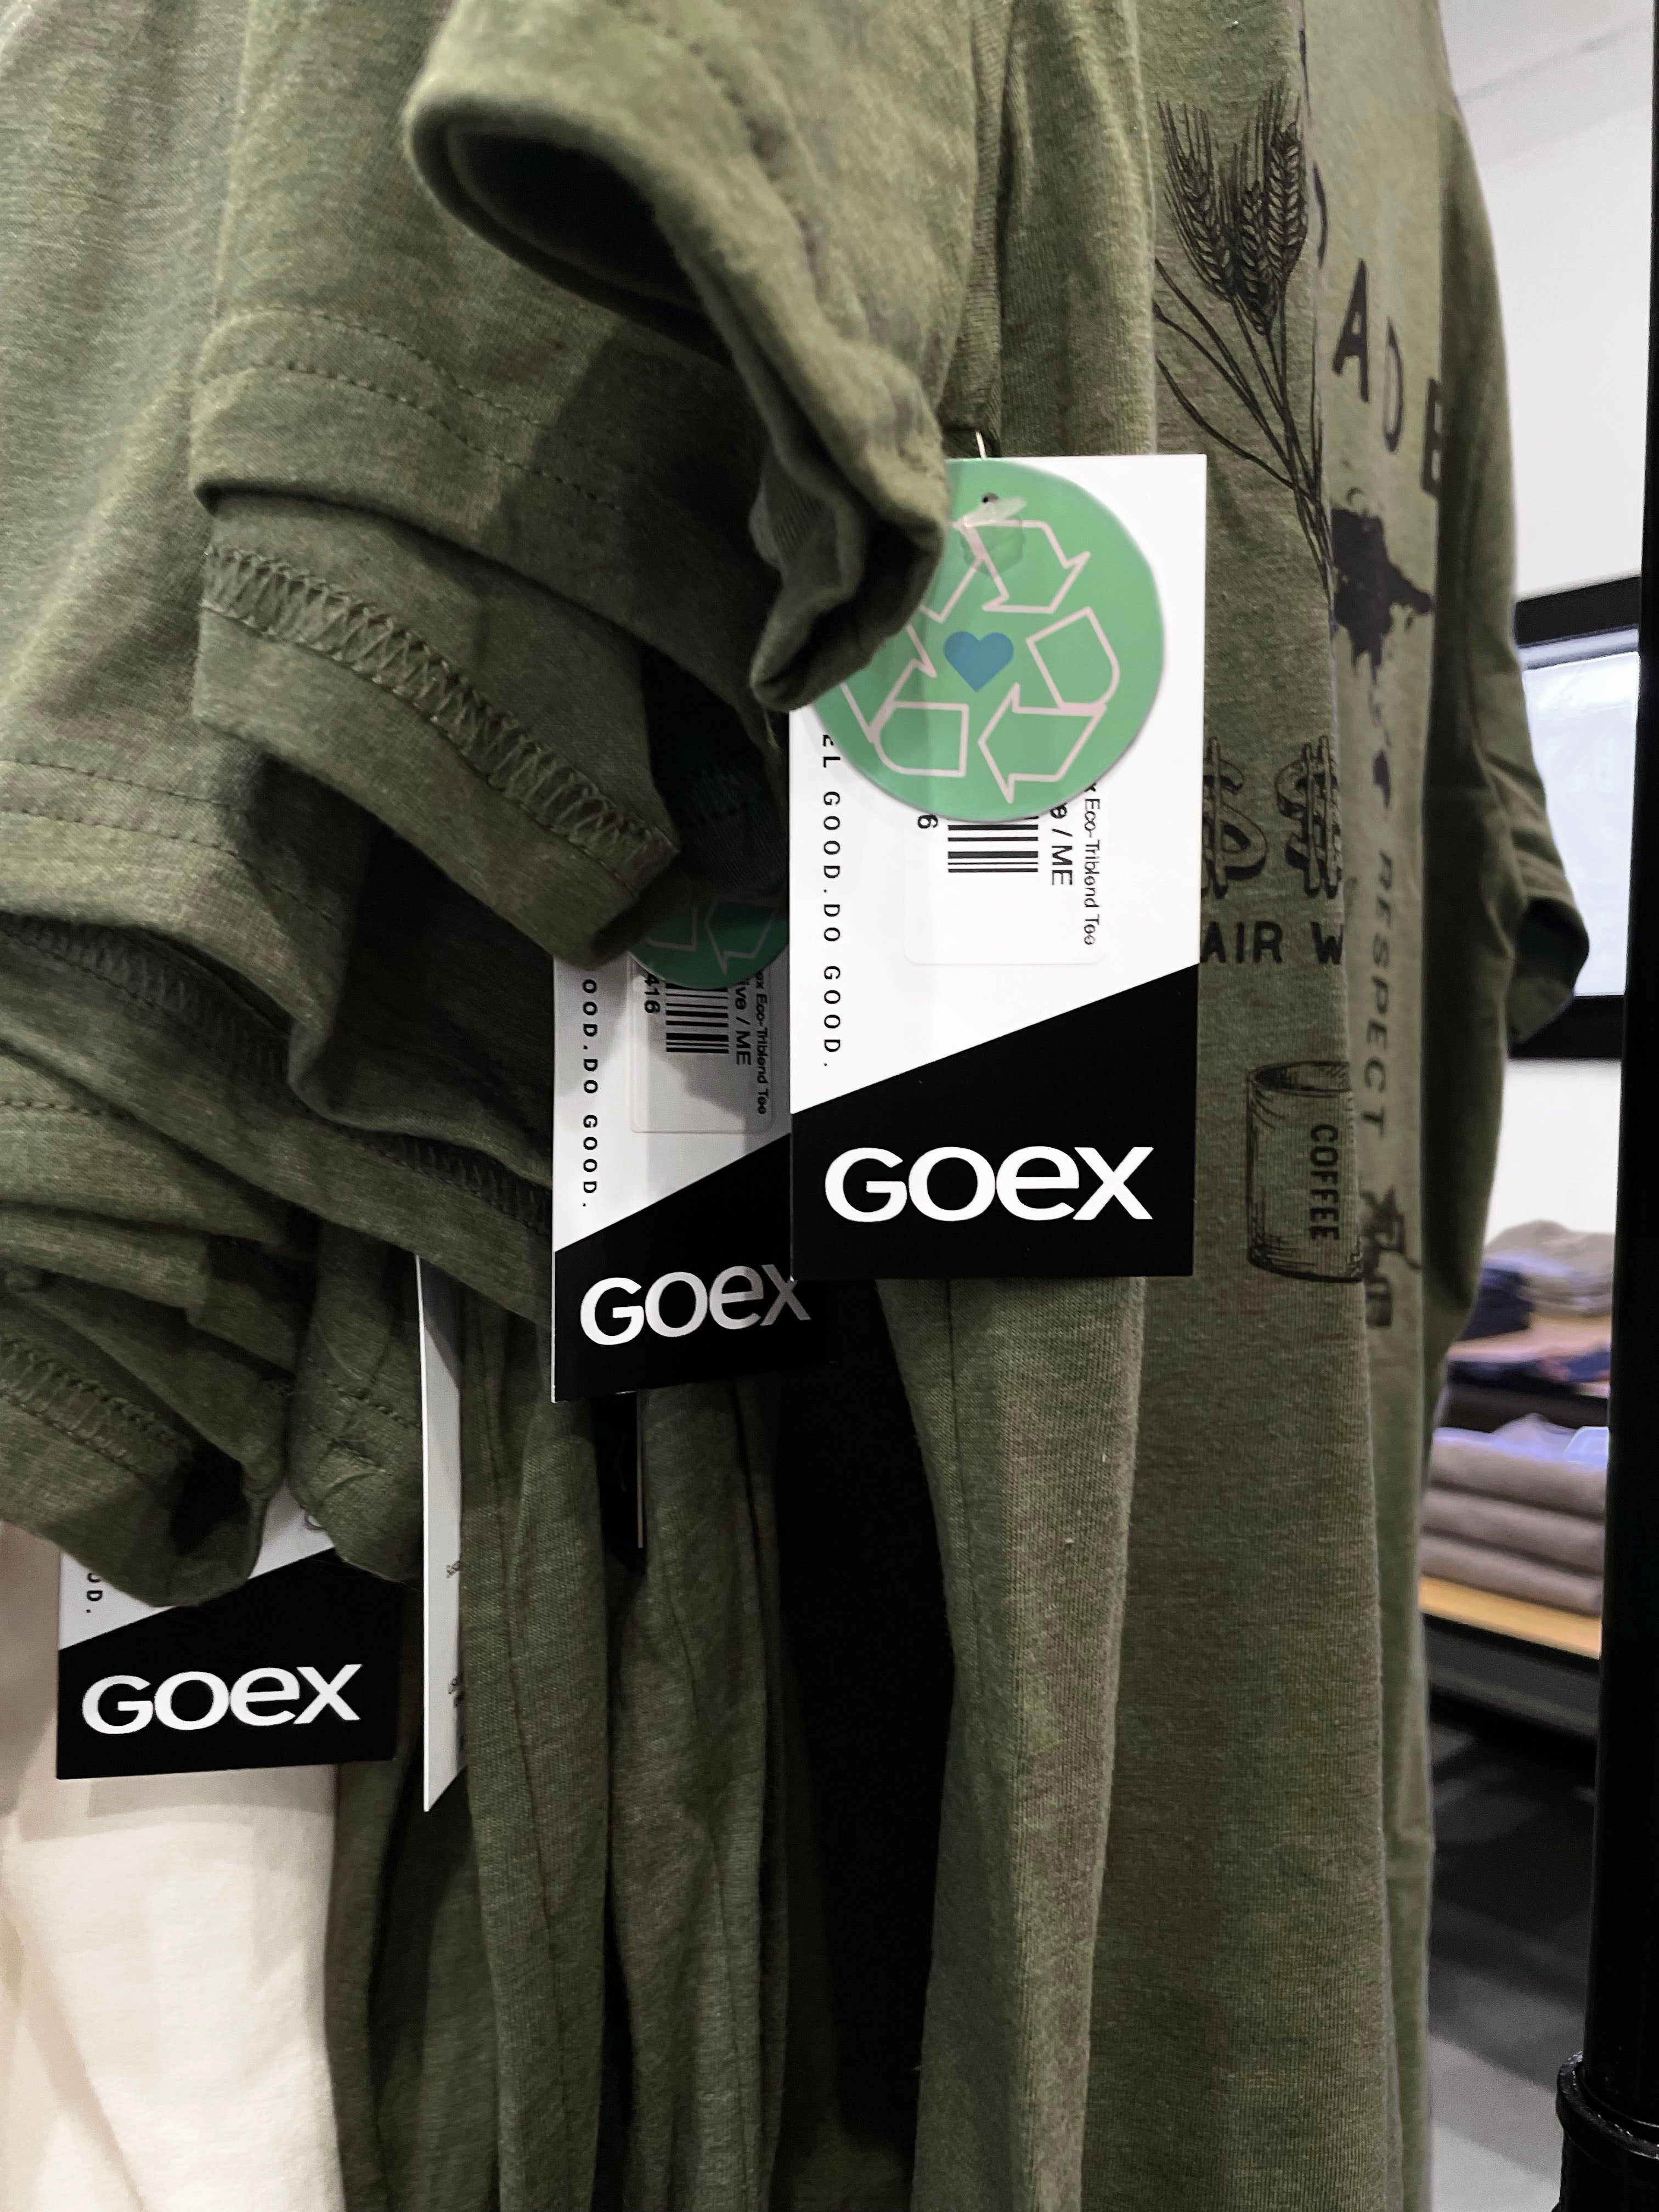 Close up picture of GOEX hangtags on shirts